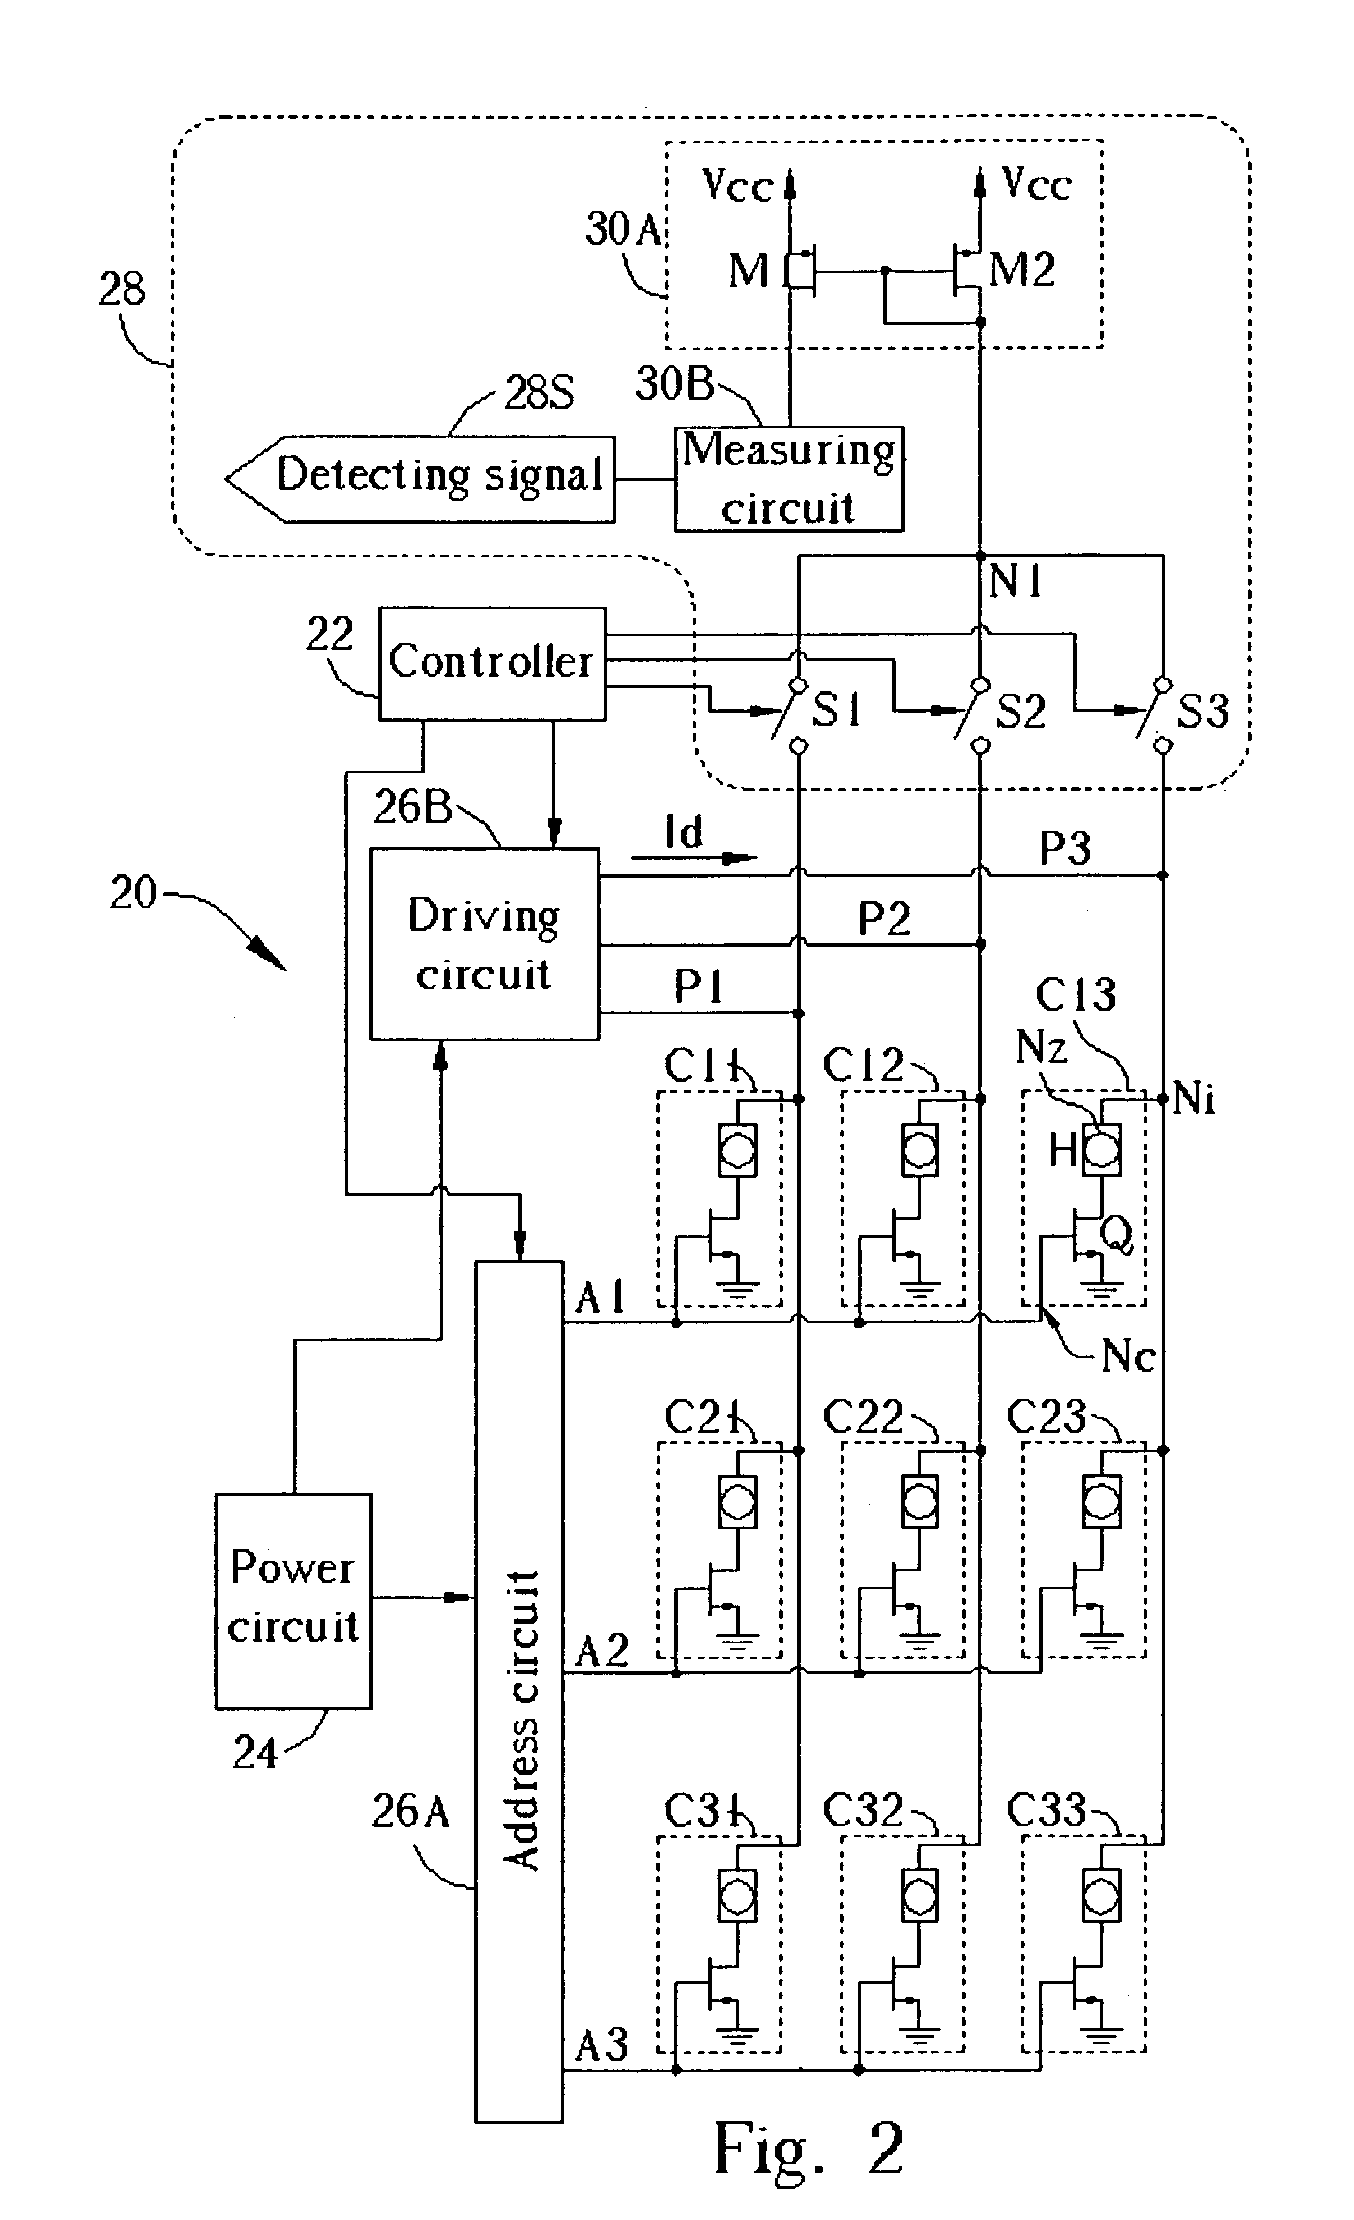 Method and related apparatus for performing short and open circuit testing of ink jet printer head